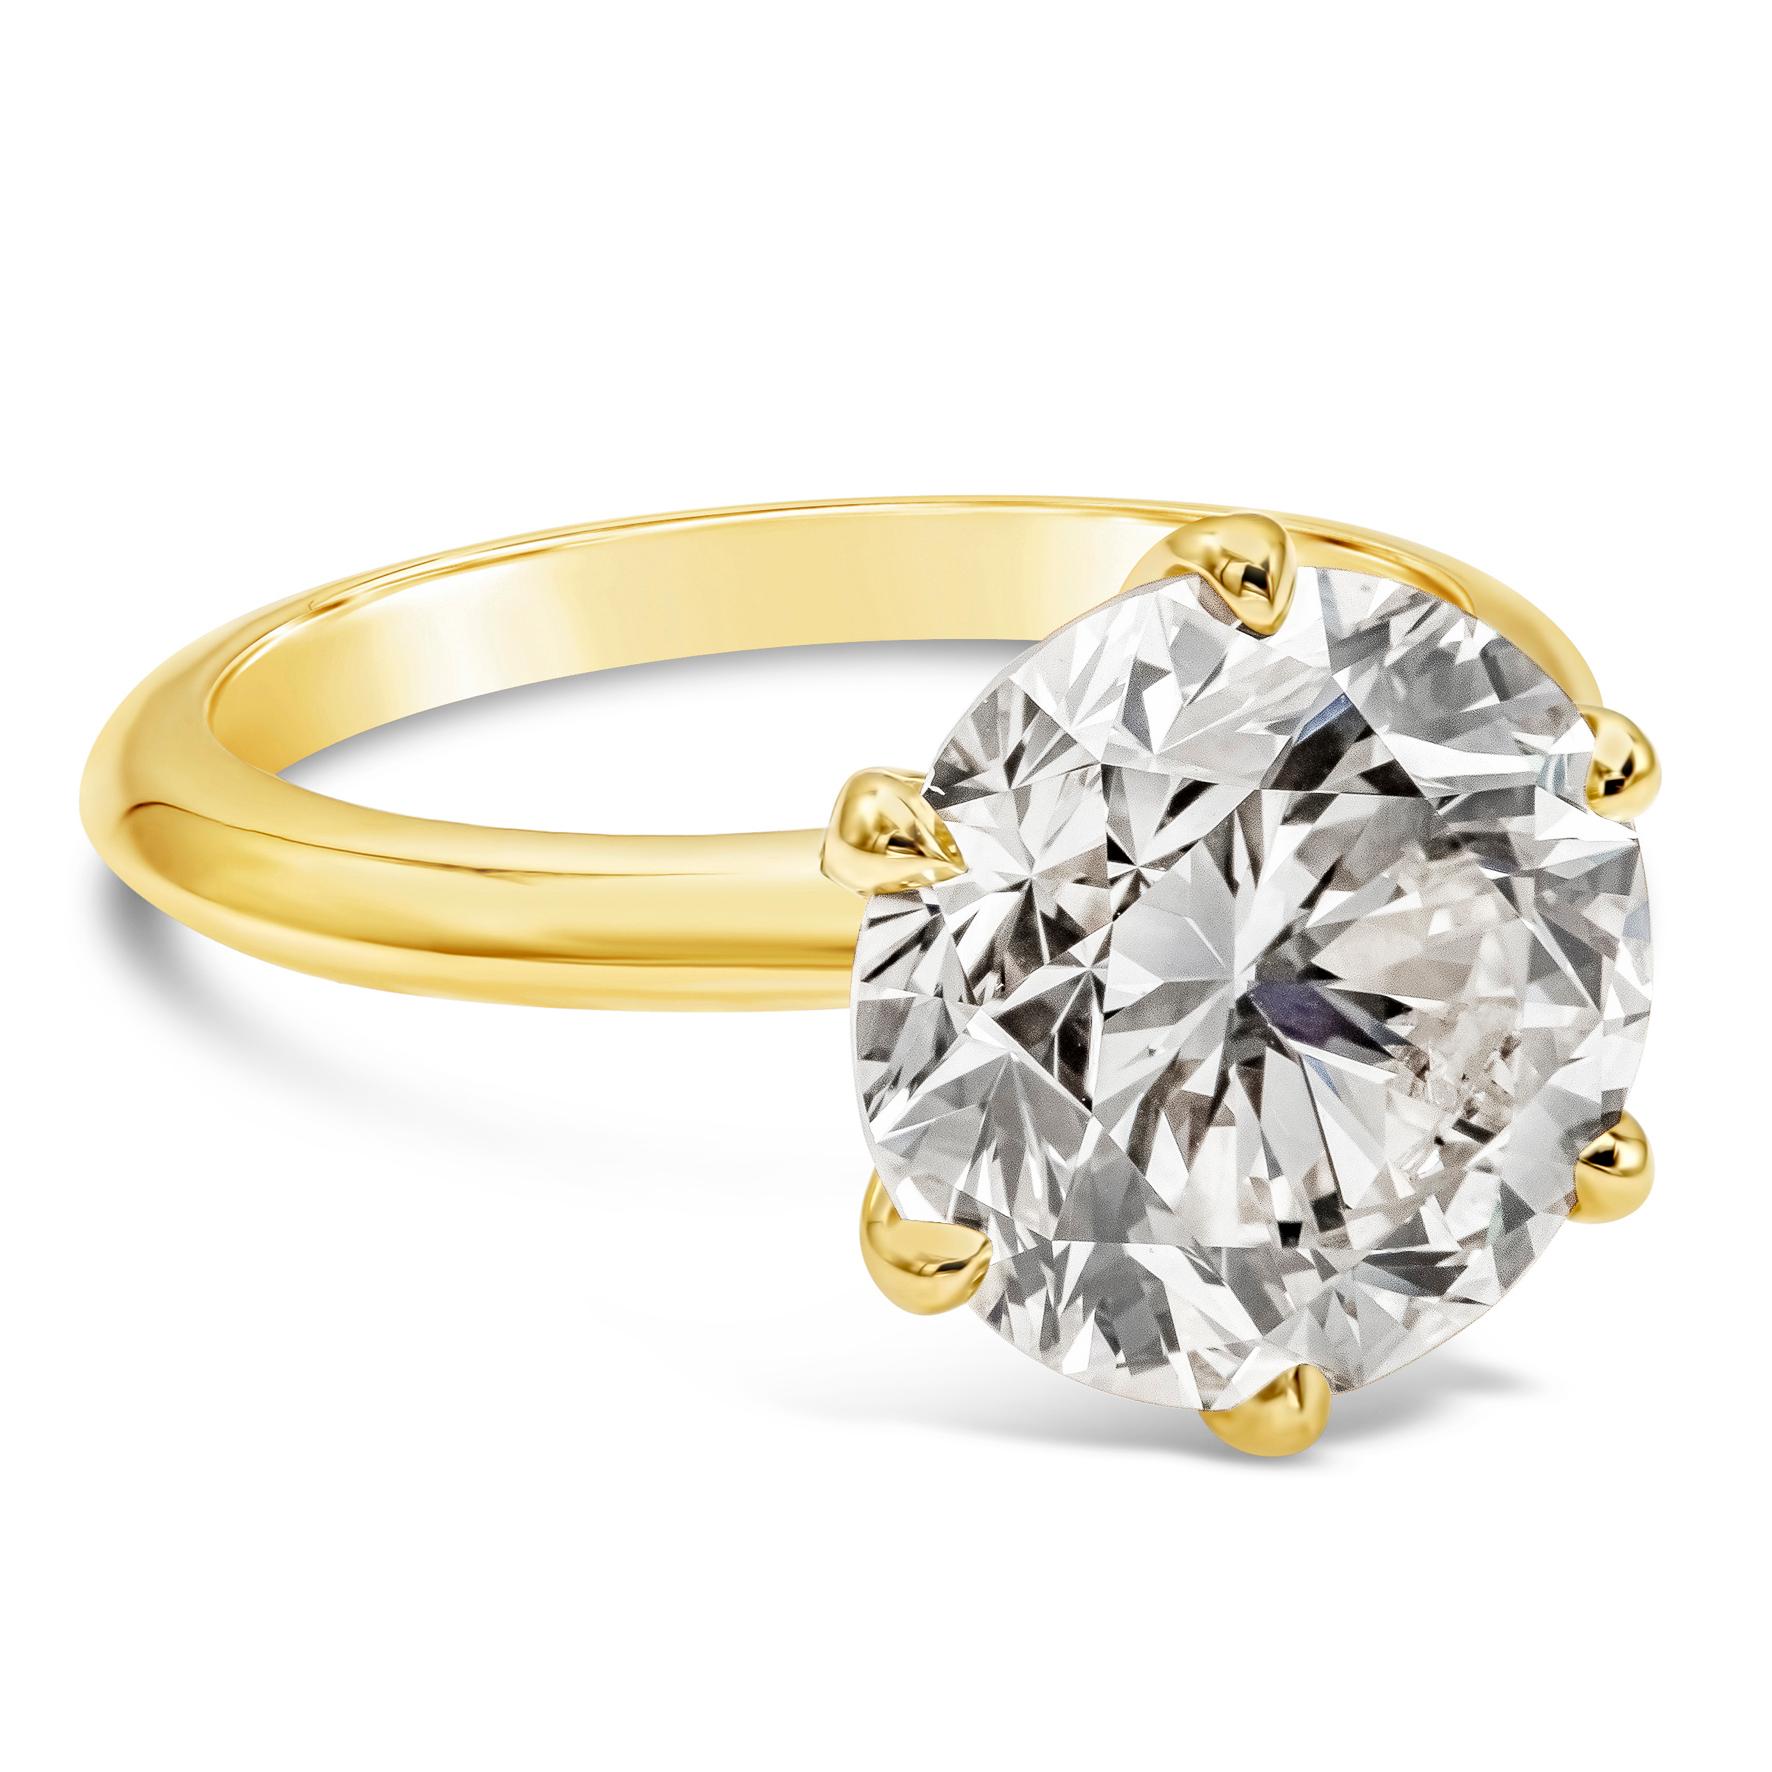 A classic engagement ring style showcasing a GIA Certified 5.48 carat round brilliant diamond, N Color and VS2 in Clarity, Excellent polish and Excellent Symmetry. Mounted in a six-prong setting, Made with 18K Yellow Gold, Size 6.25 US

Style